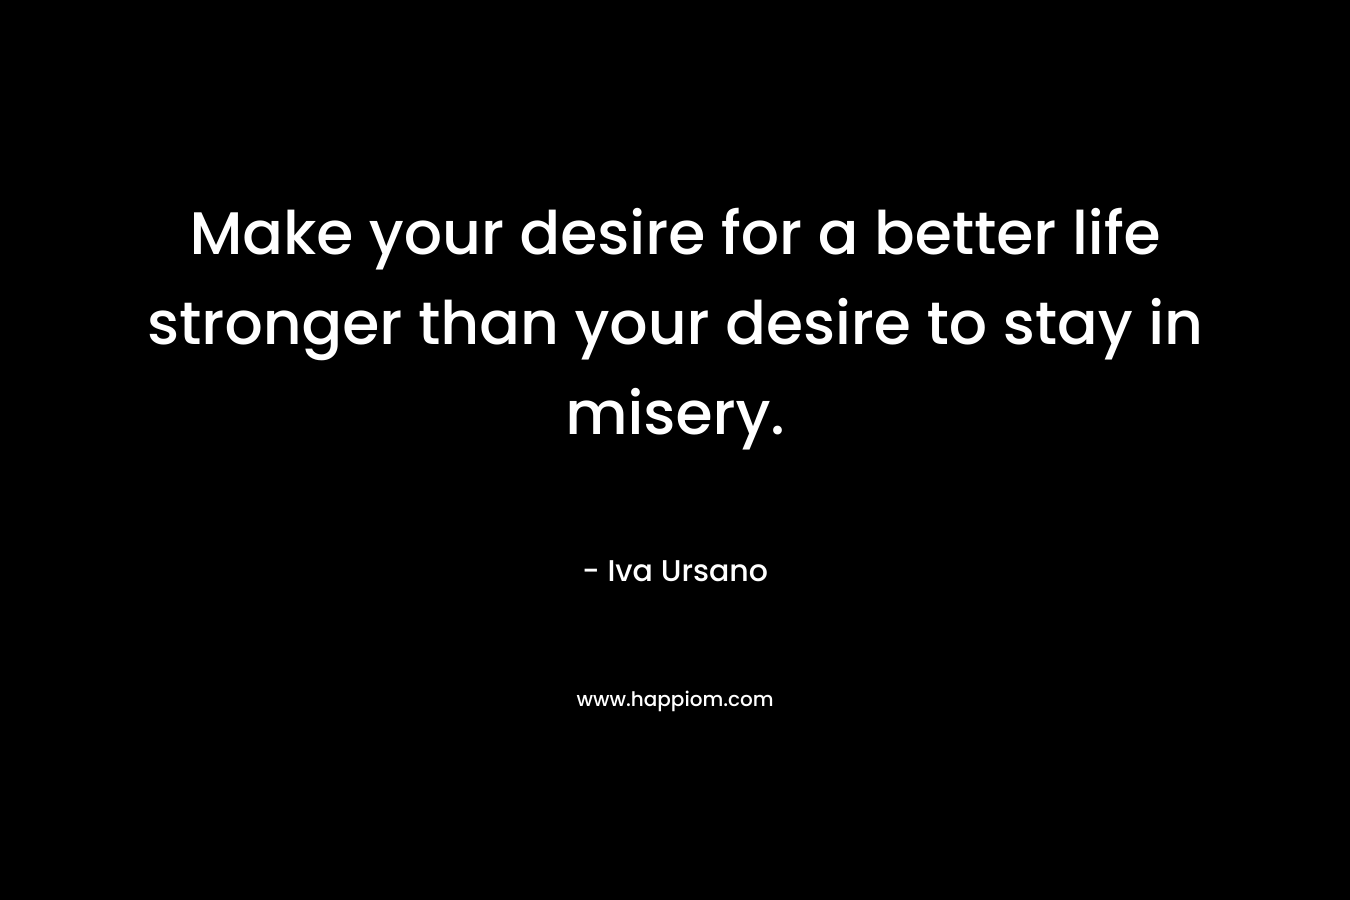 Make your desire for a better life stronger than your desire to stay in misery. – Iva Ursano